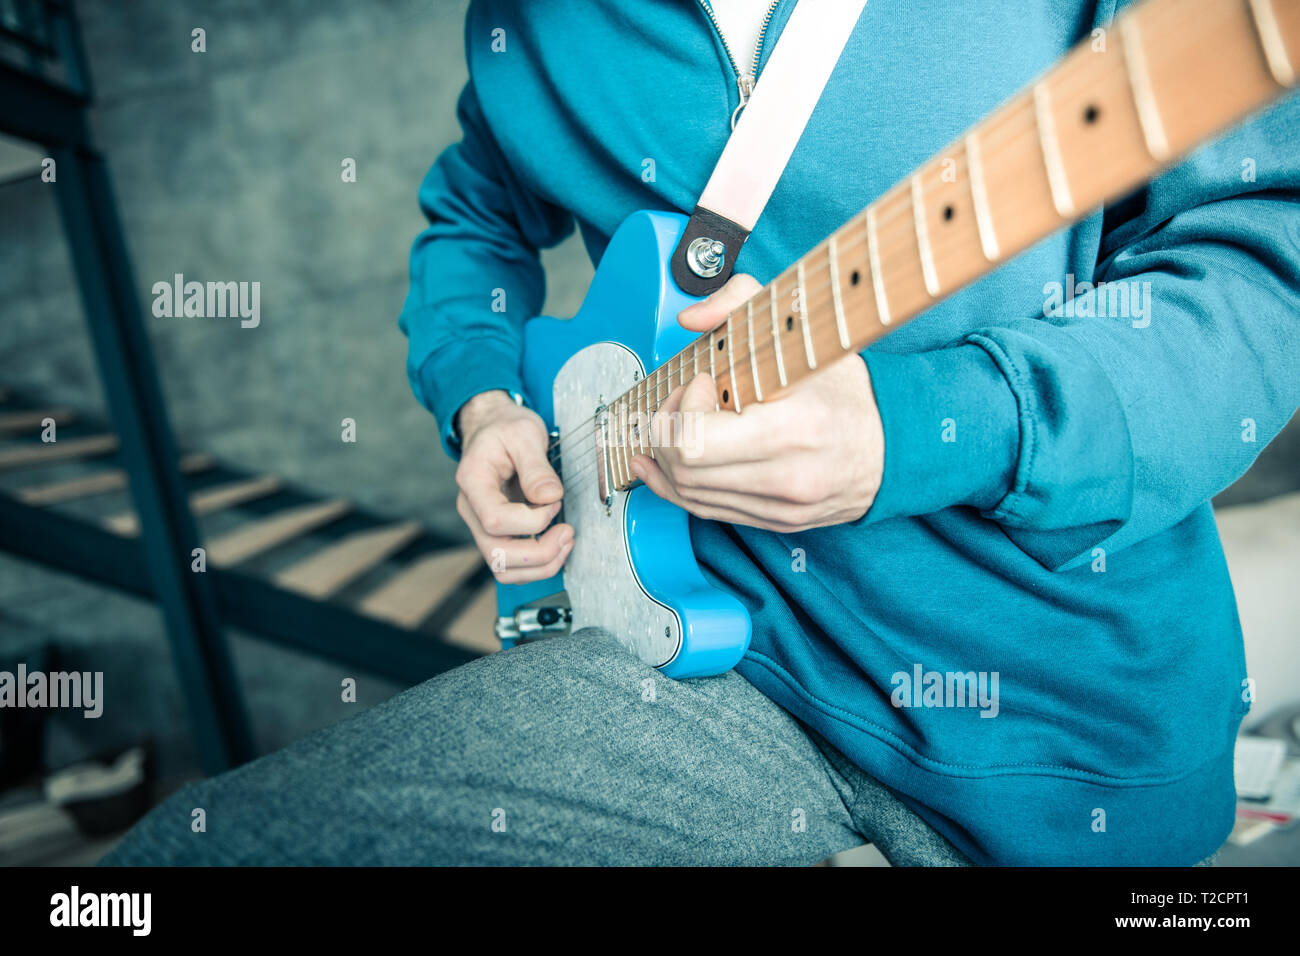 Professional musician in bright sweatshirt carrying blue electronic guitar Stock Photo